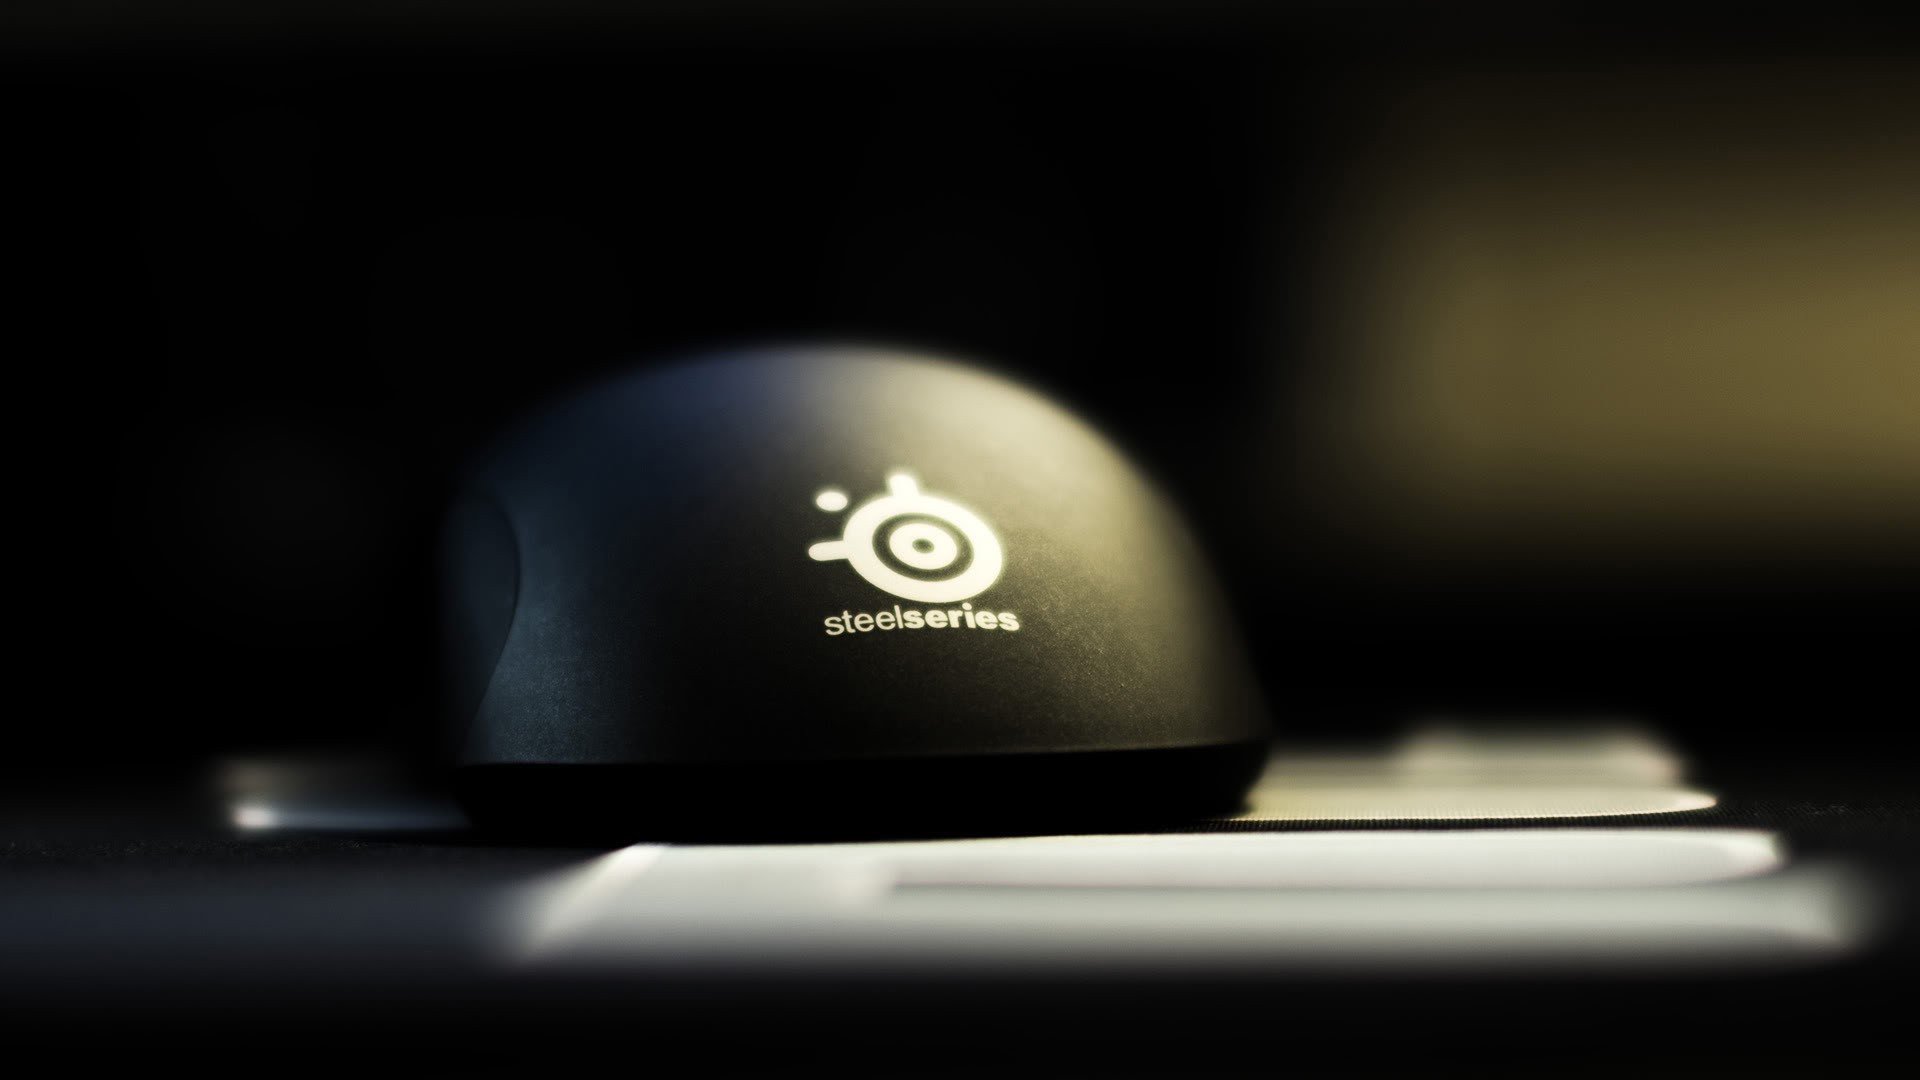 steelseries, Gaming, Computer, Mouse, Ds Wallpaper